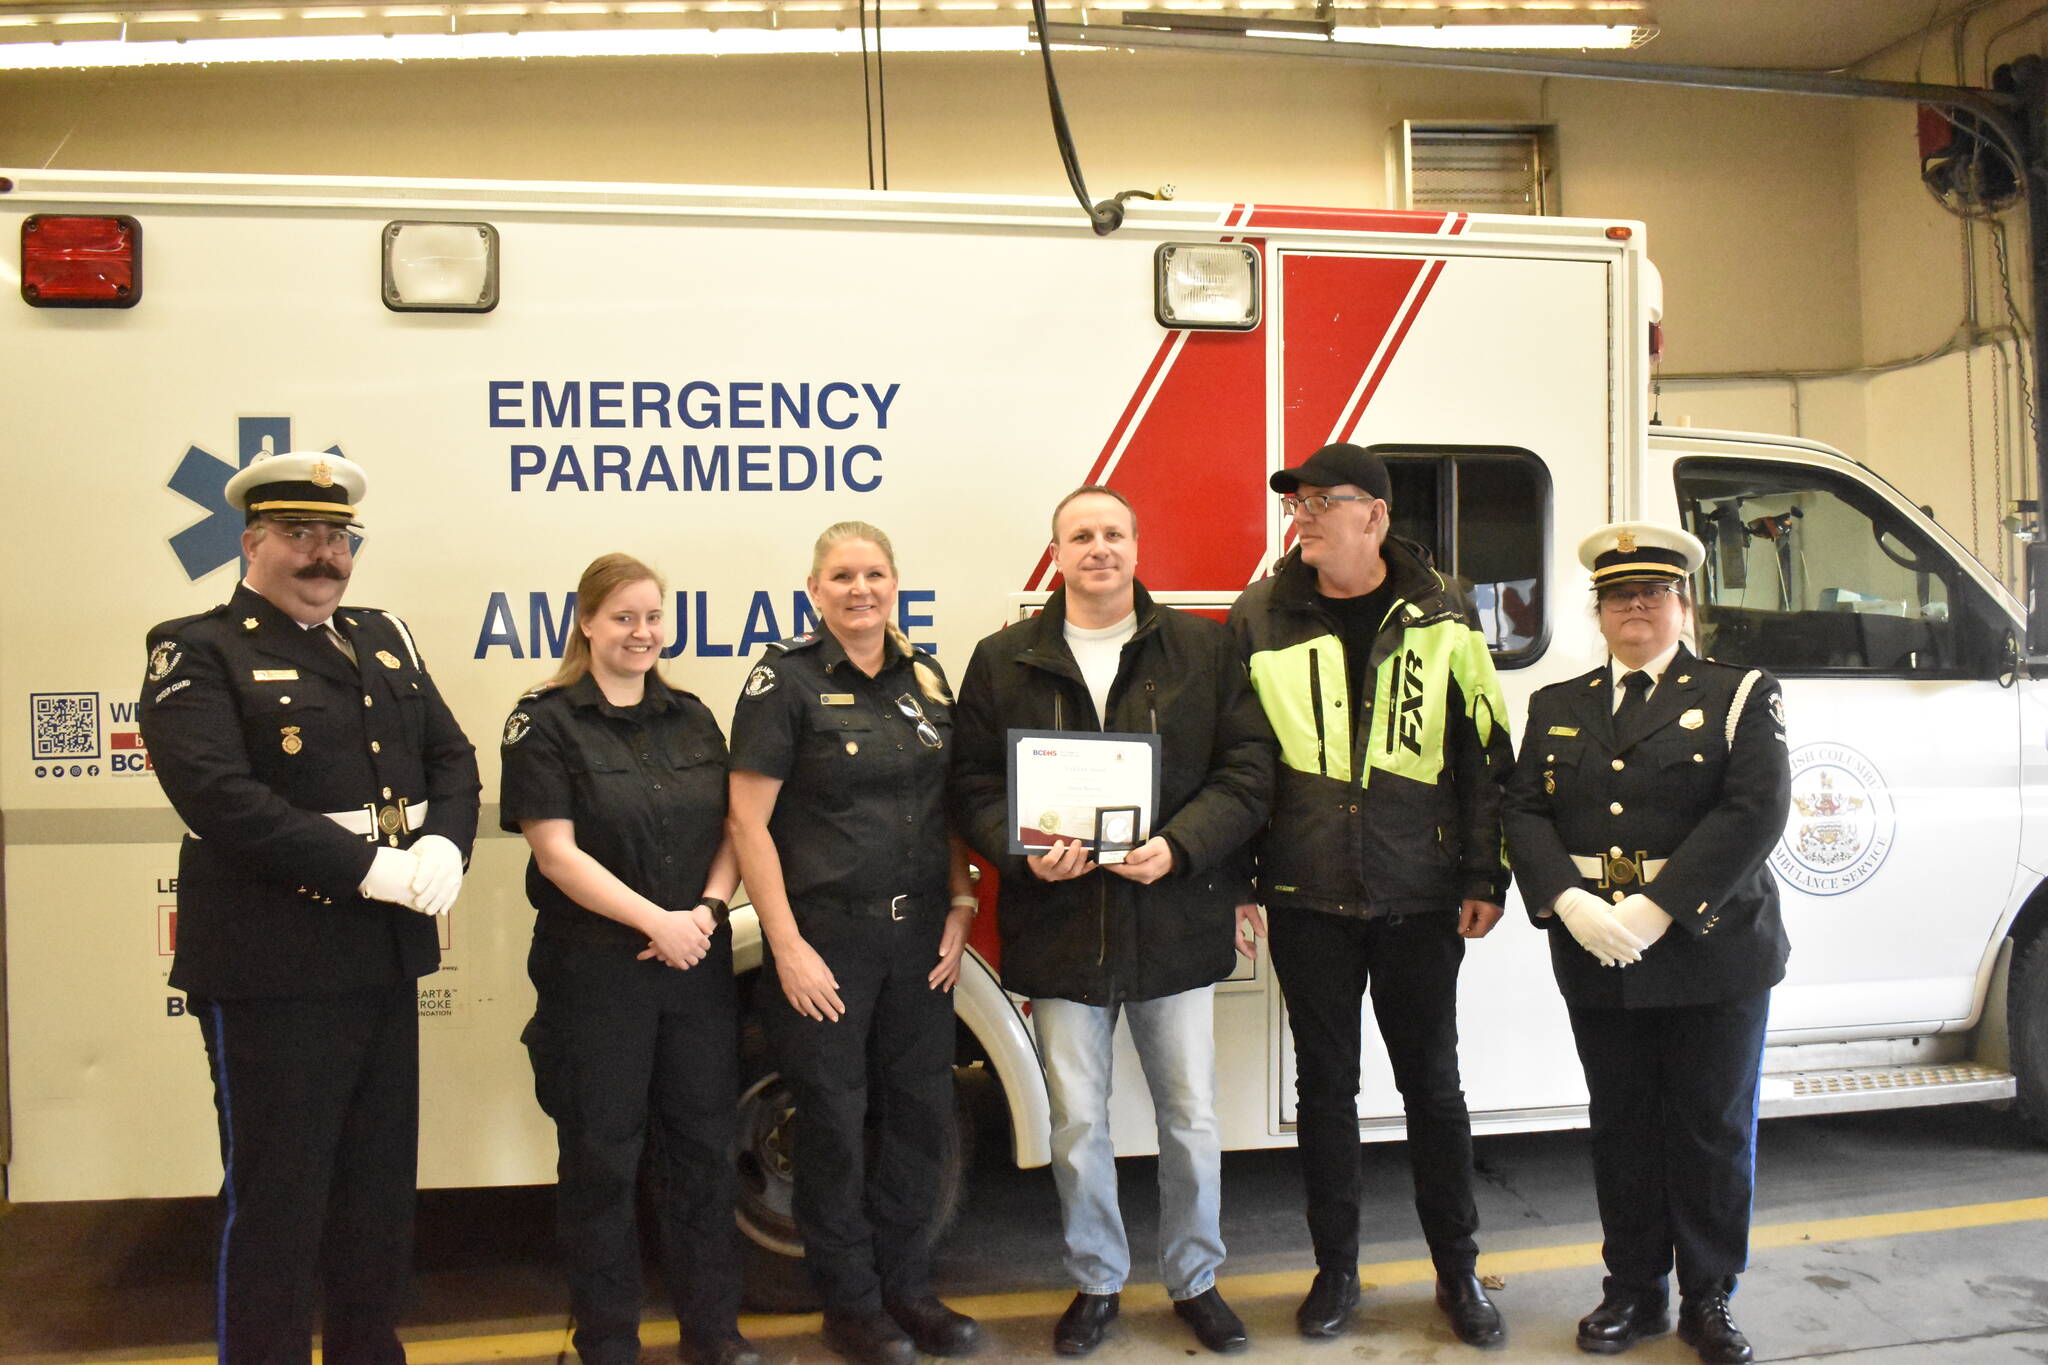 Sinisa Marovic, third from right, saved the life of his neighbour Sinisa Zakosek, second from right, in May 2021 through the use of CPR. He was presented on Friday, Feb. 24, with the Vital Link Award from BCHES.